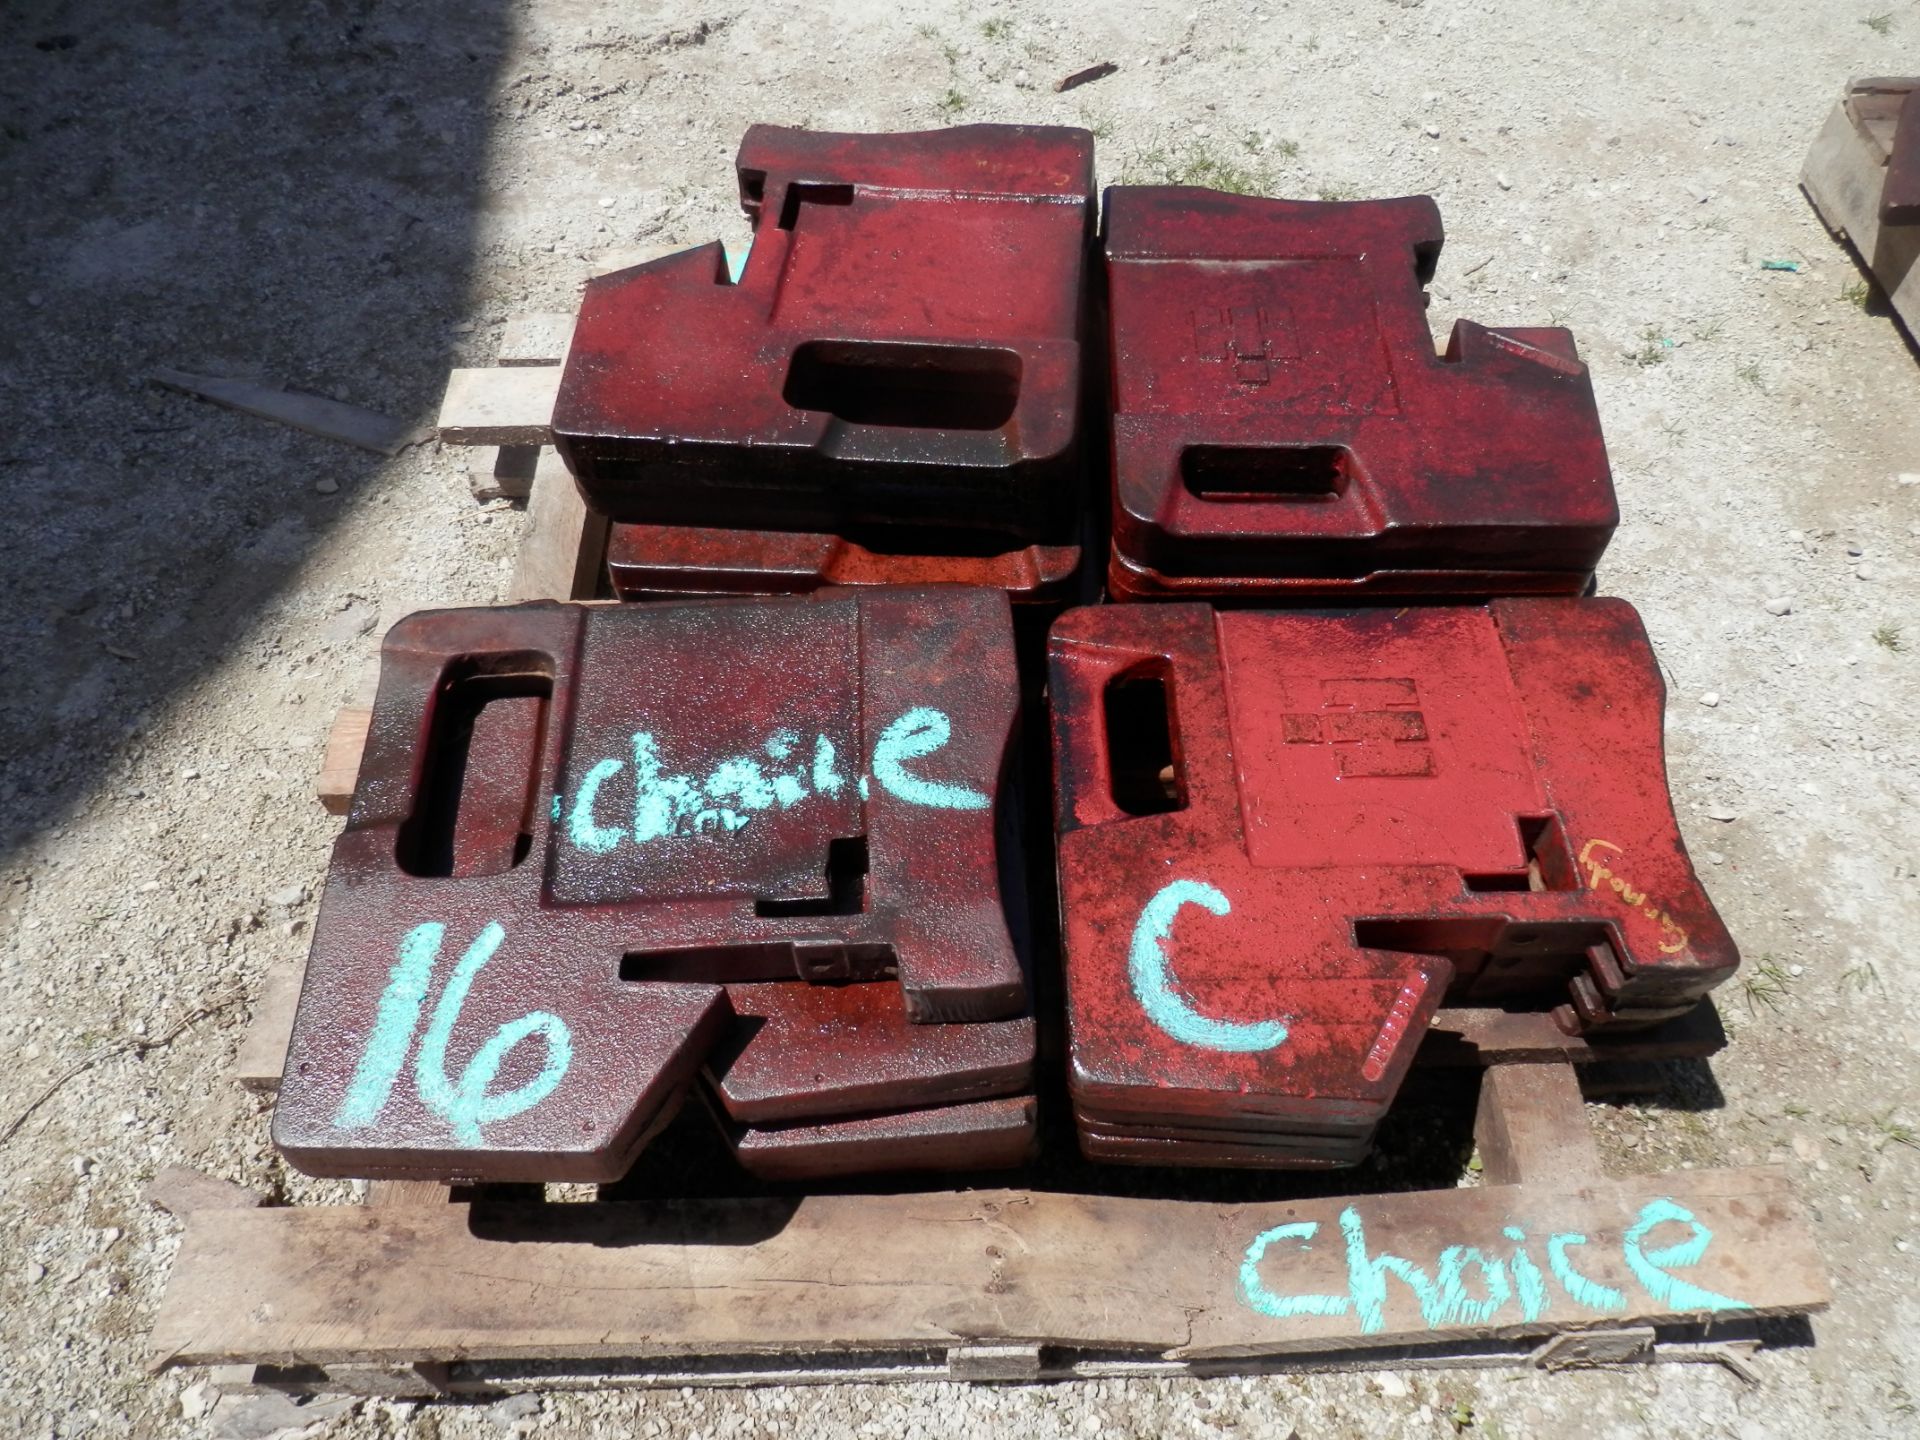 WEIGHTS C-(16) INTERNATIONAL SUITCASE WEIGHTS, SELLING CHOICE $ X Wt.